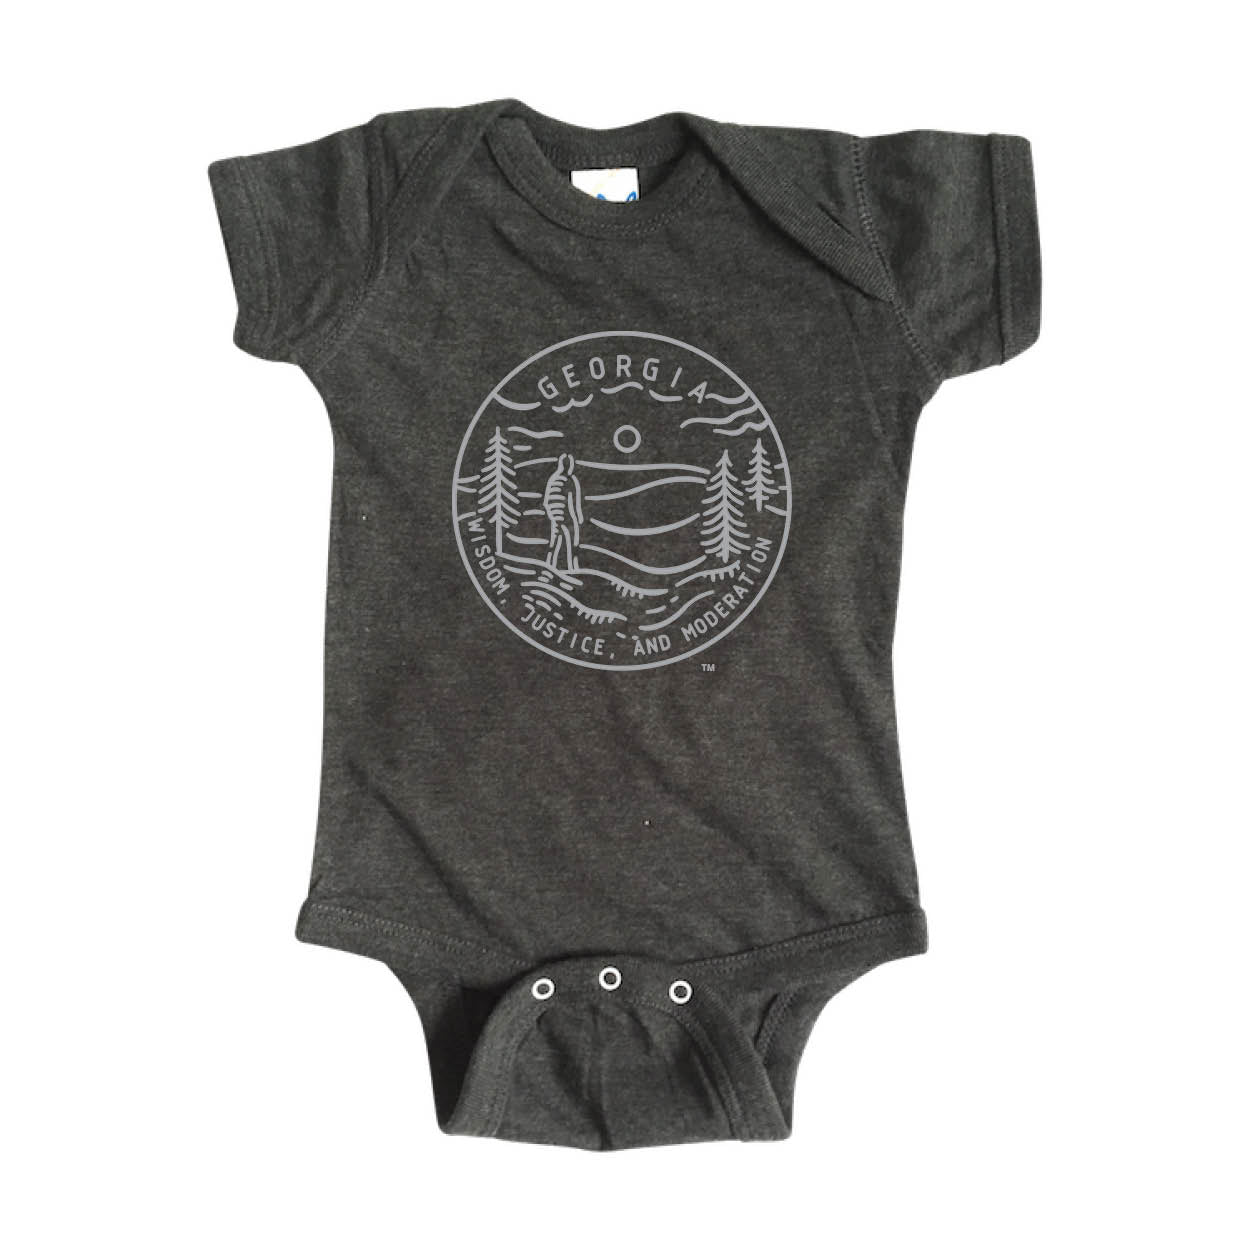 GEORGIA ONESIE | STATE SEAL | WISDOM, JUSTICE, AND MODERATION